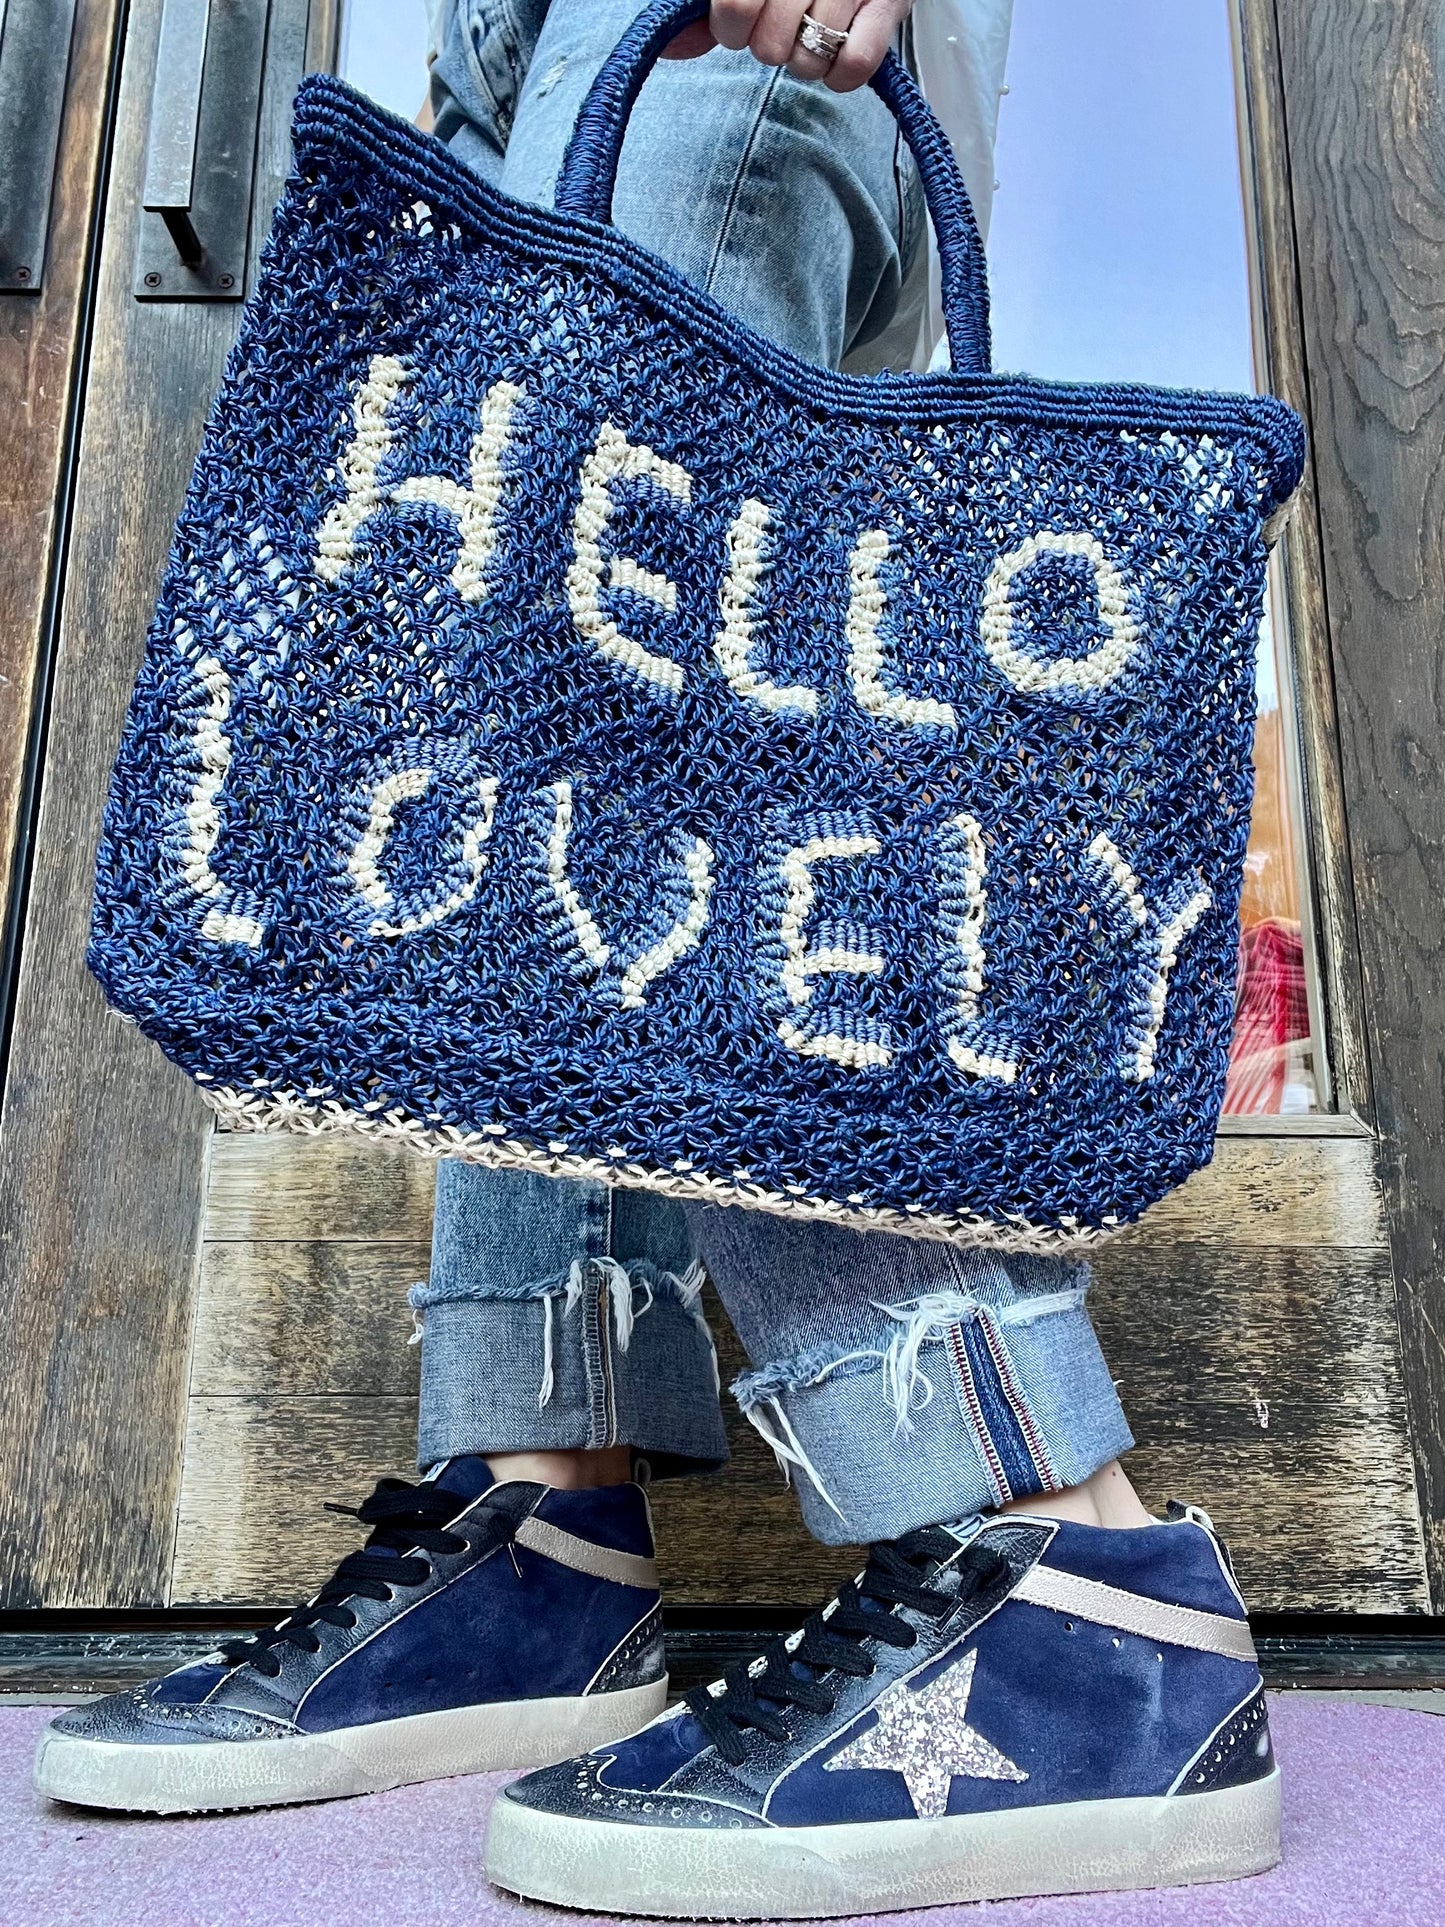 Jacksons "HELLO LOVELY" Small Tote